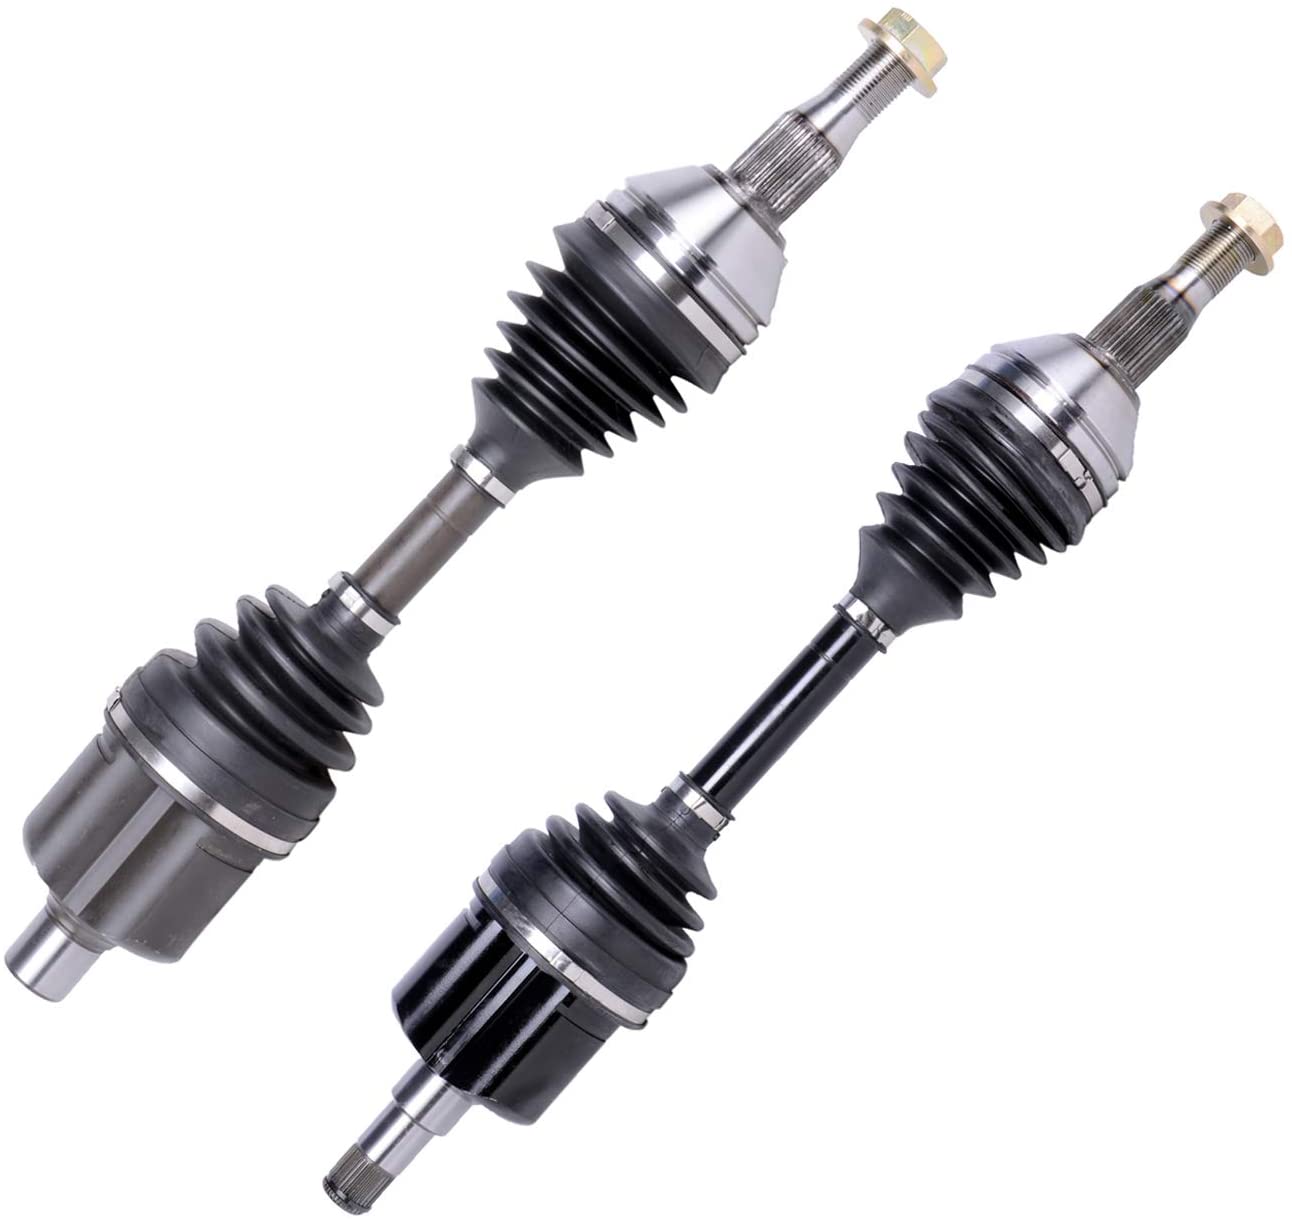 Bodeman - Pair Front CV Axle Drive Shaft Assembly for 2000-2011 Chevy Impala NO-SS, 2000-2005 Buick Century, 2005-2009 LaCrosse V6 and 1997-2004 Regal Exc. Supercharged